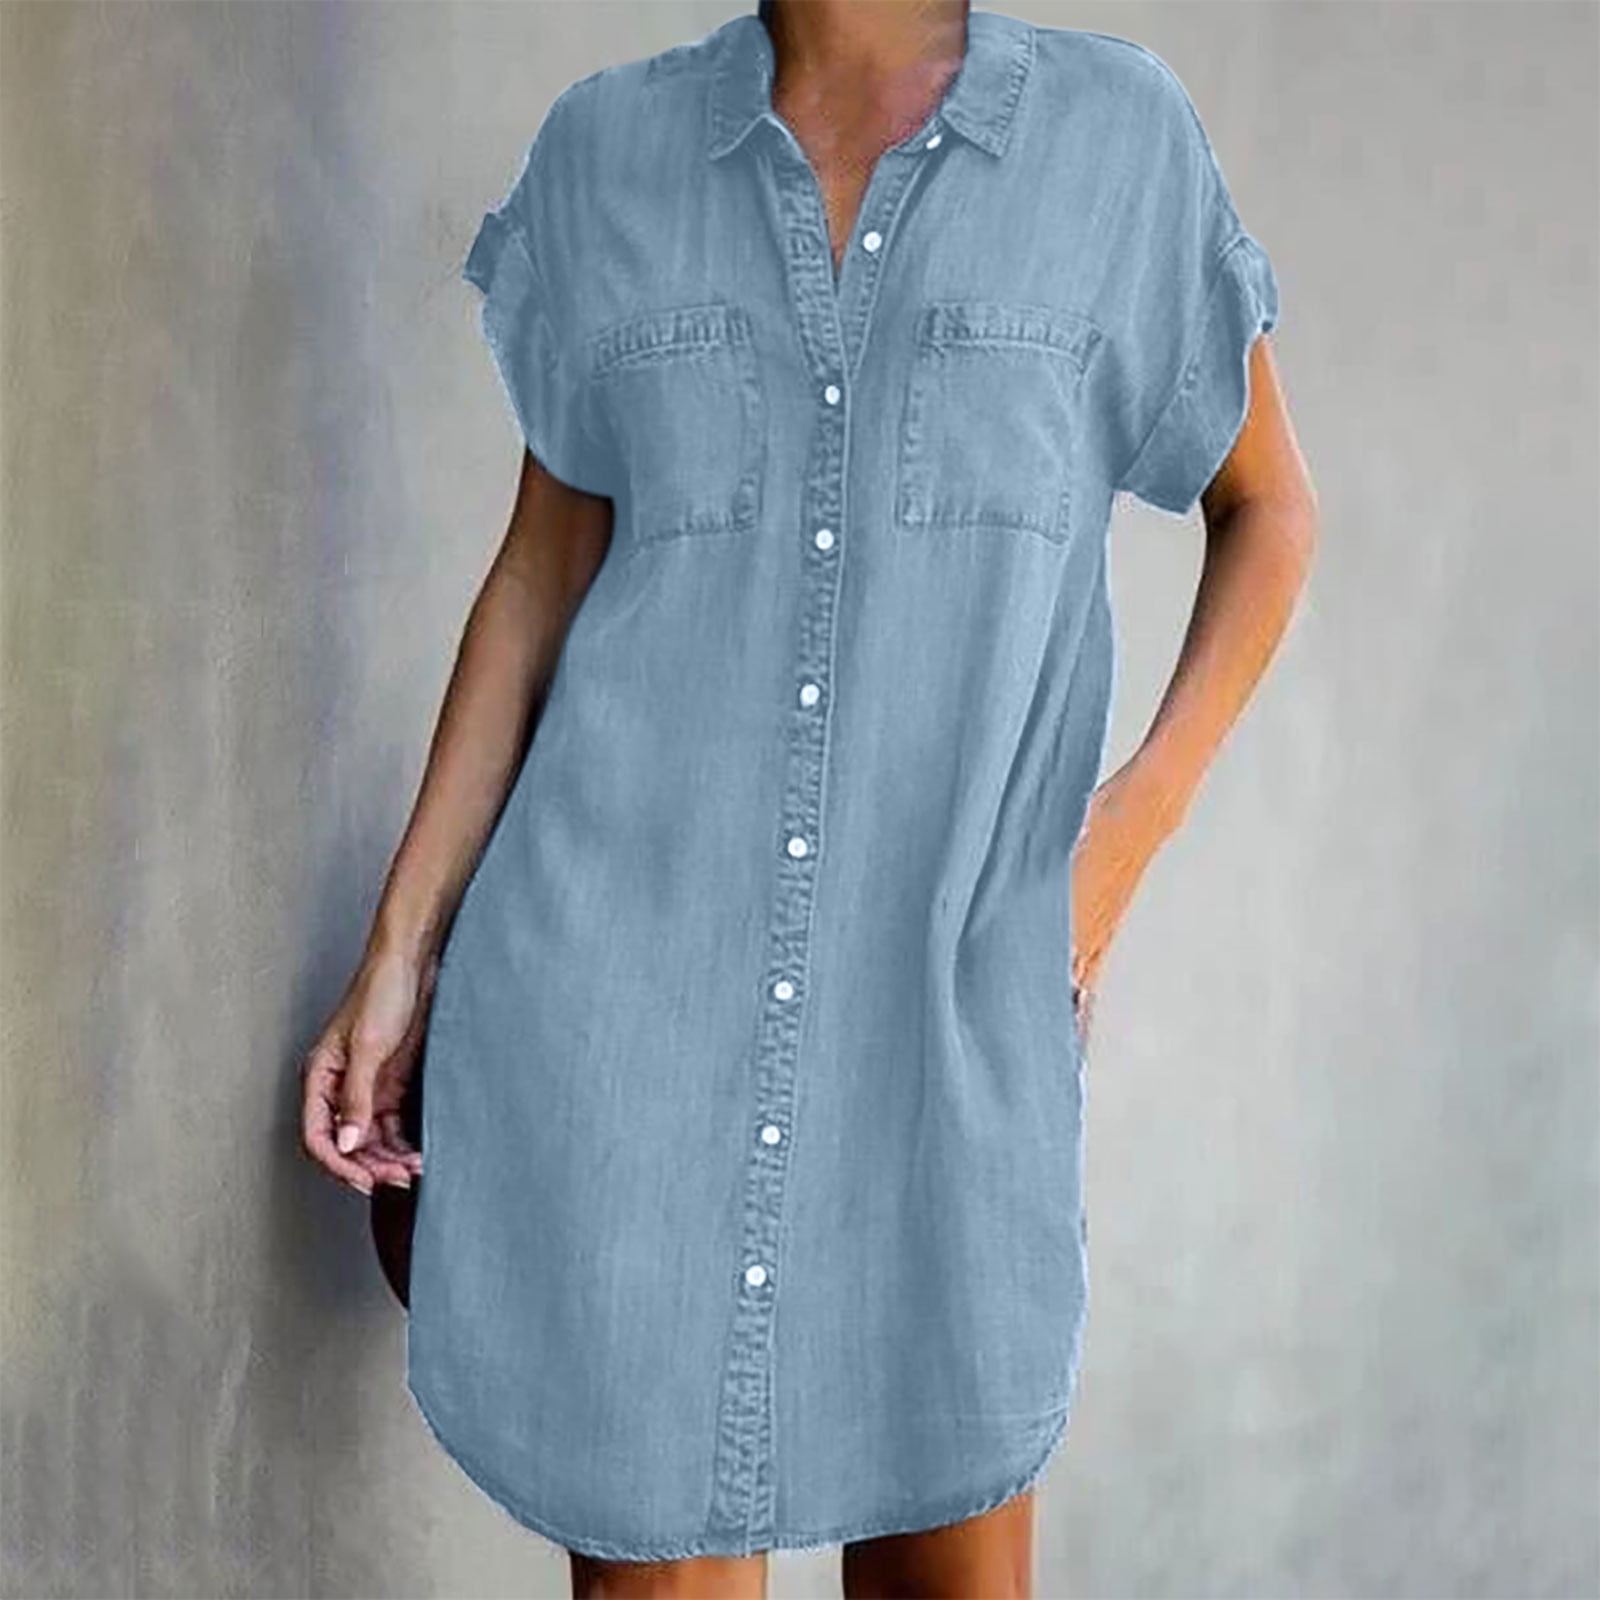 50% Off Clear! Fatuov Denim Dress for Women Short Sleeve Button Down Jean  Shirt Solid Color Loose Thin Denim Dresses with Pockets L Light Blue